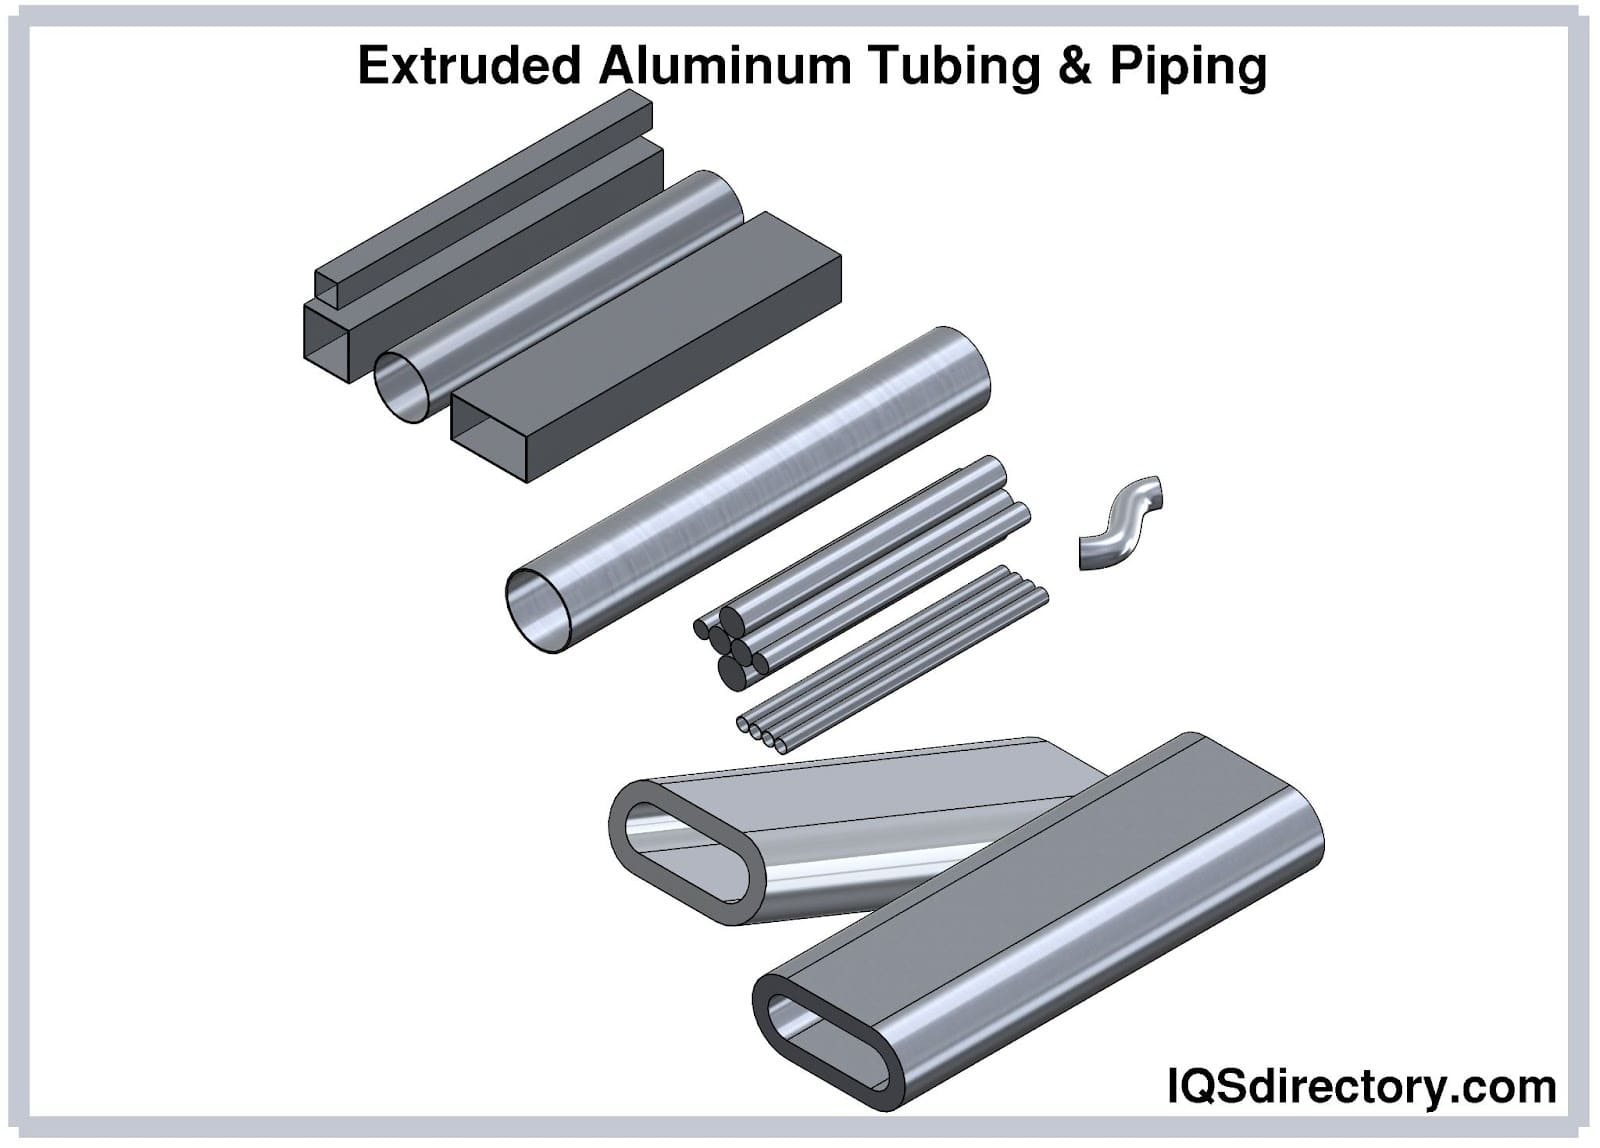 Extruded Aluminum Tubing & Piping